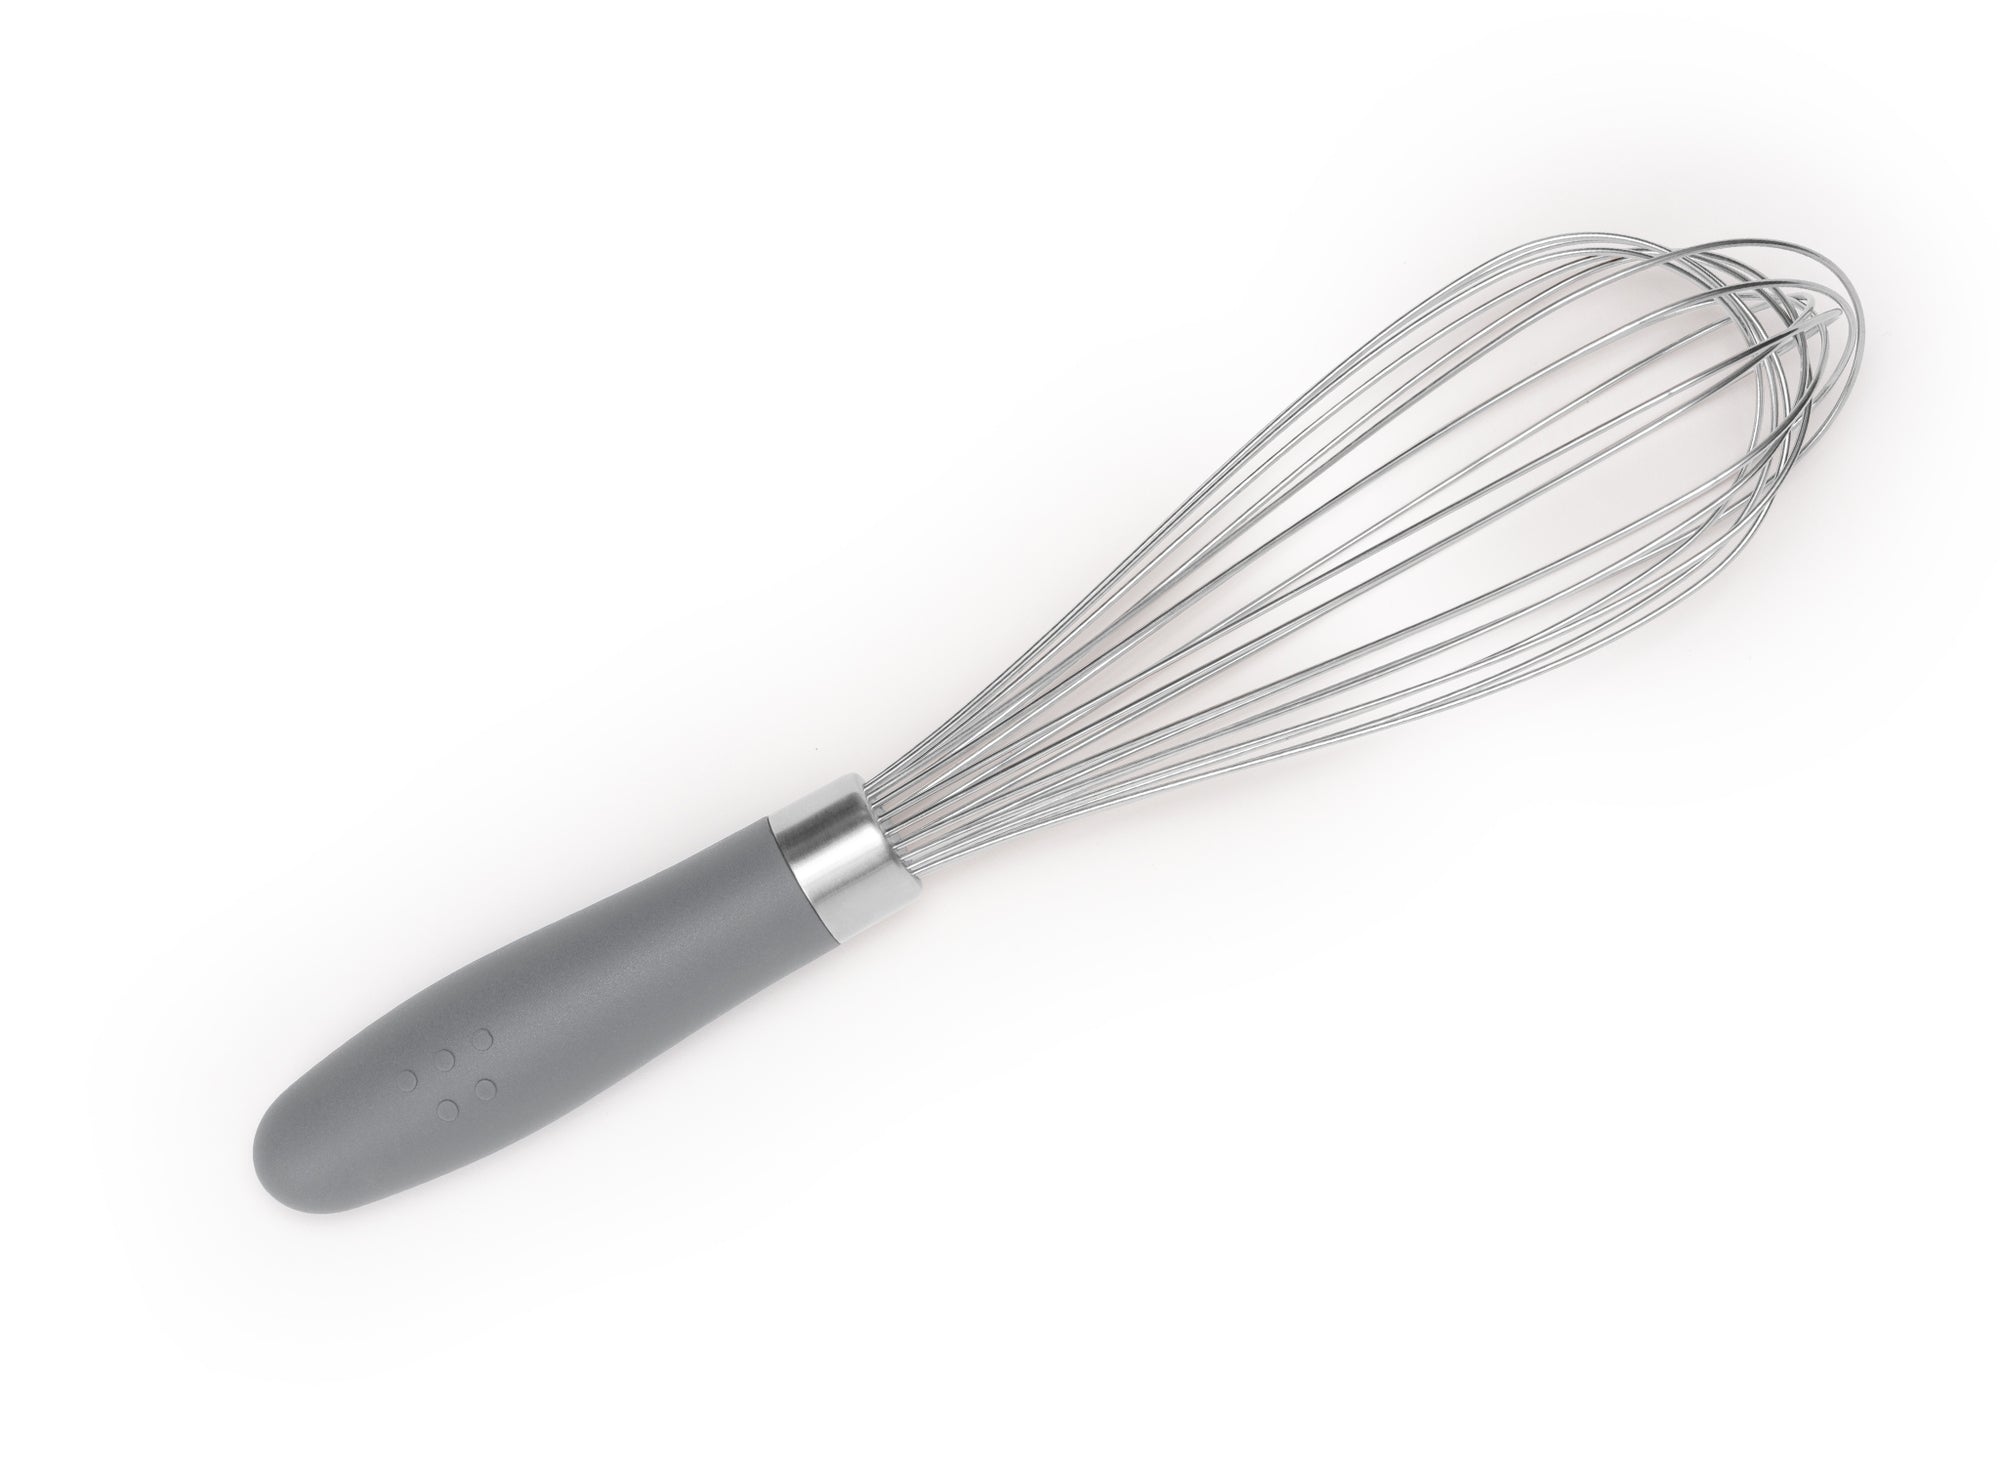 Grey Misen Whisk seen from above on a white background.